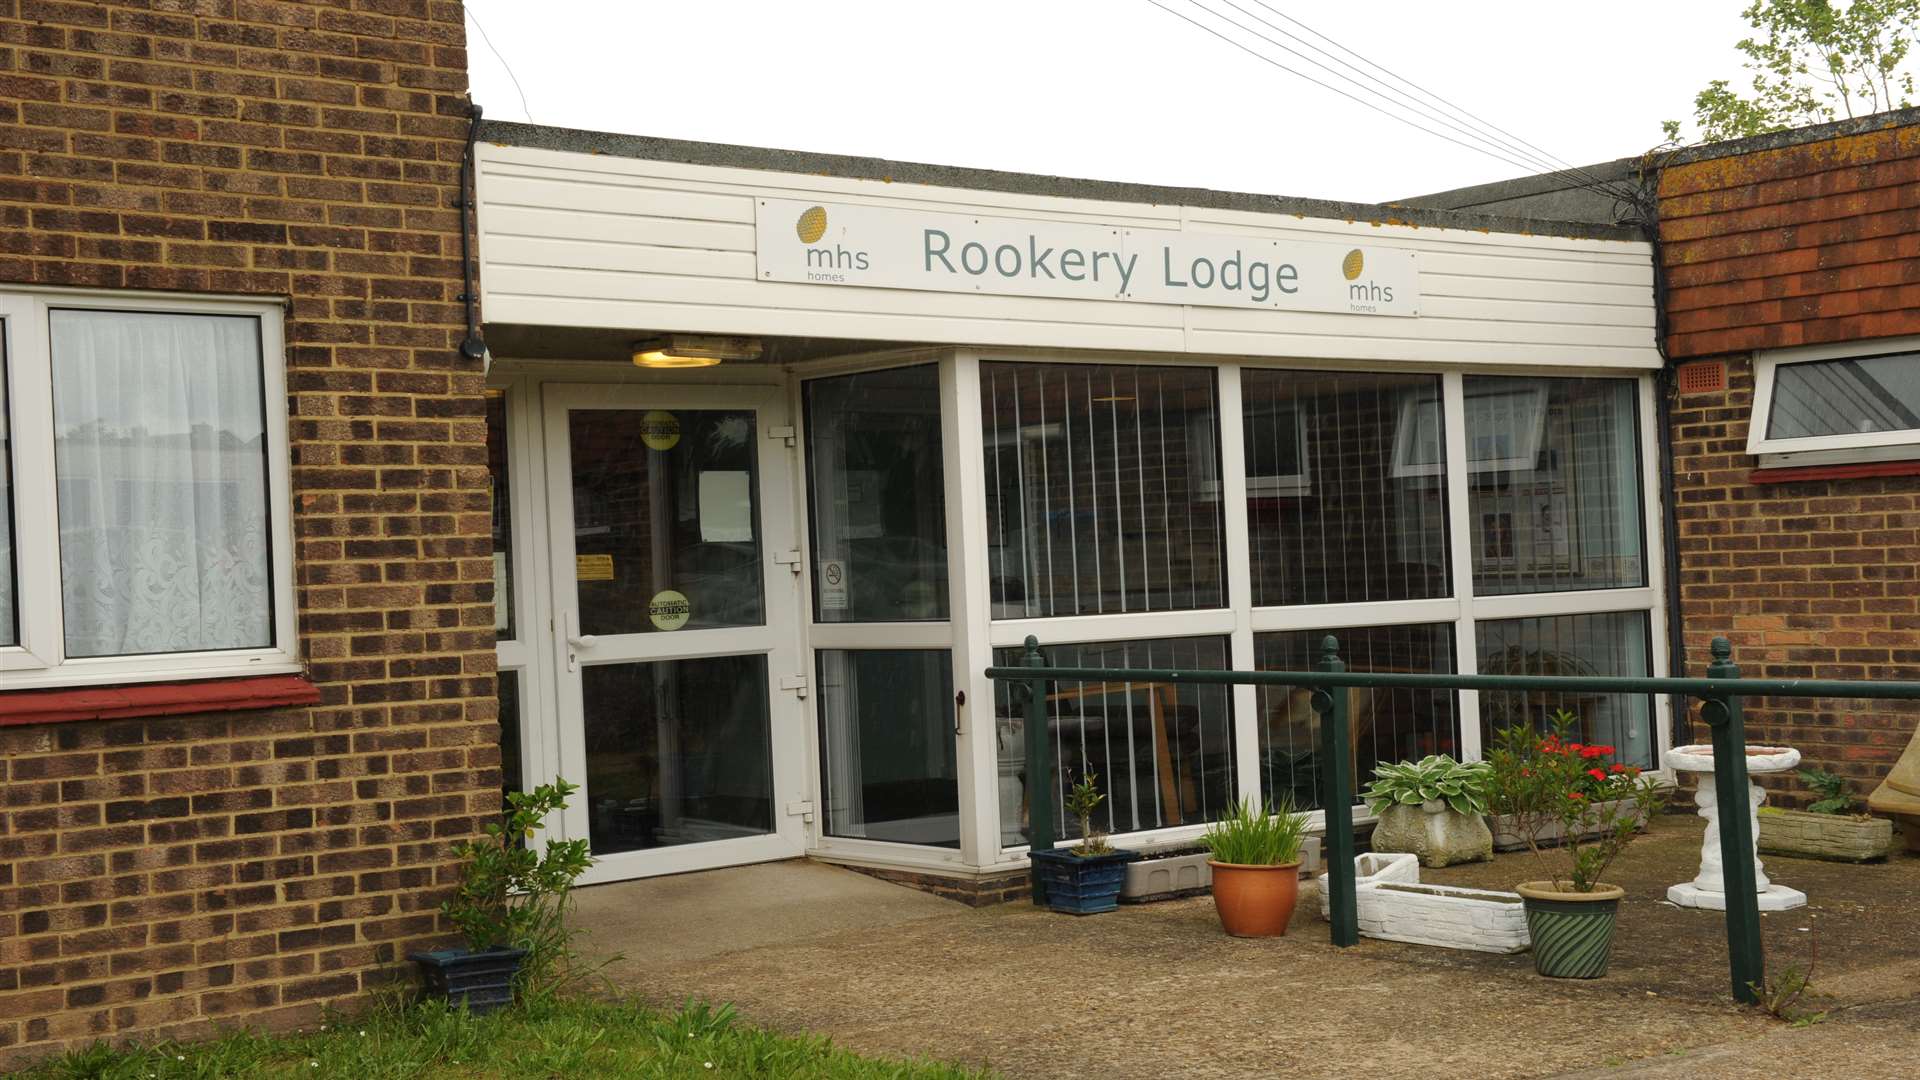 Rookery Lodge, Thatcher's Lane, Cliffe